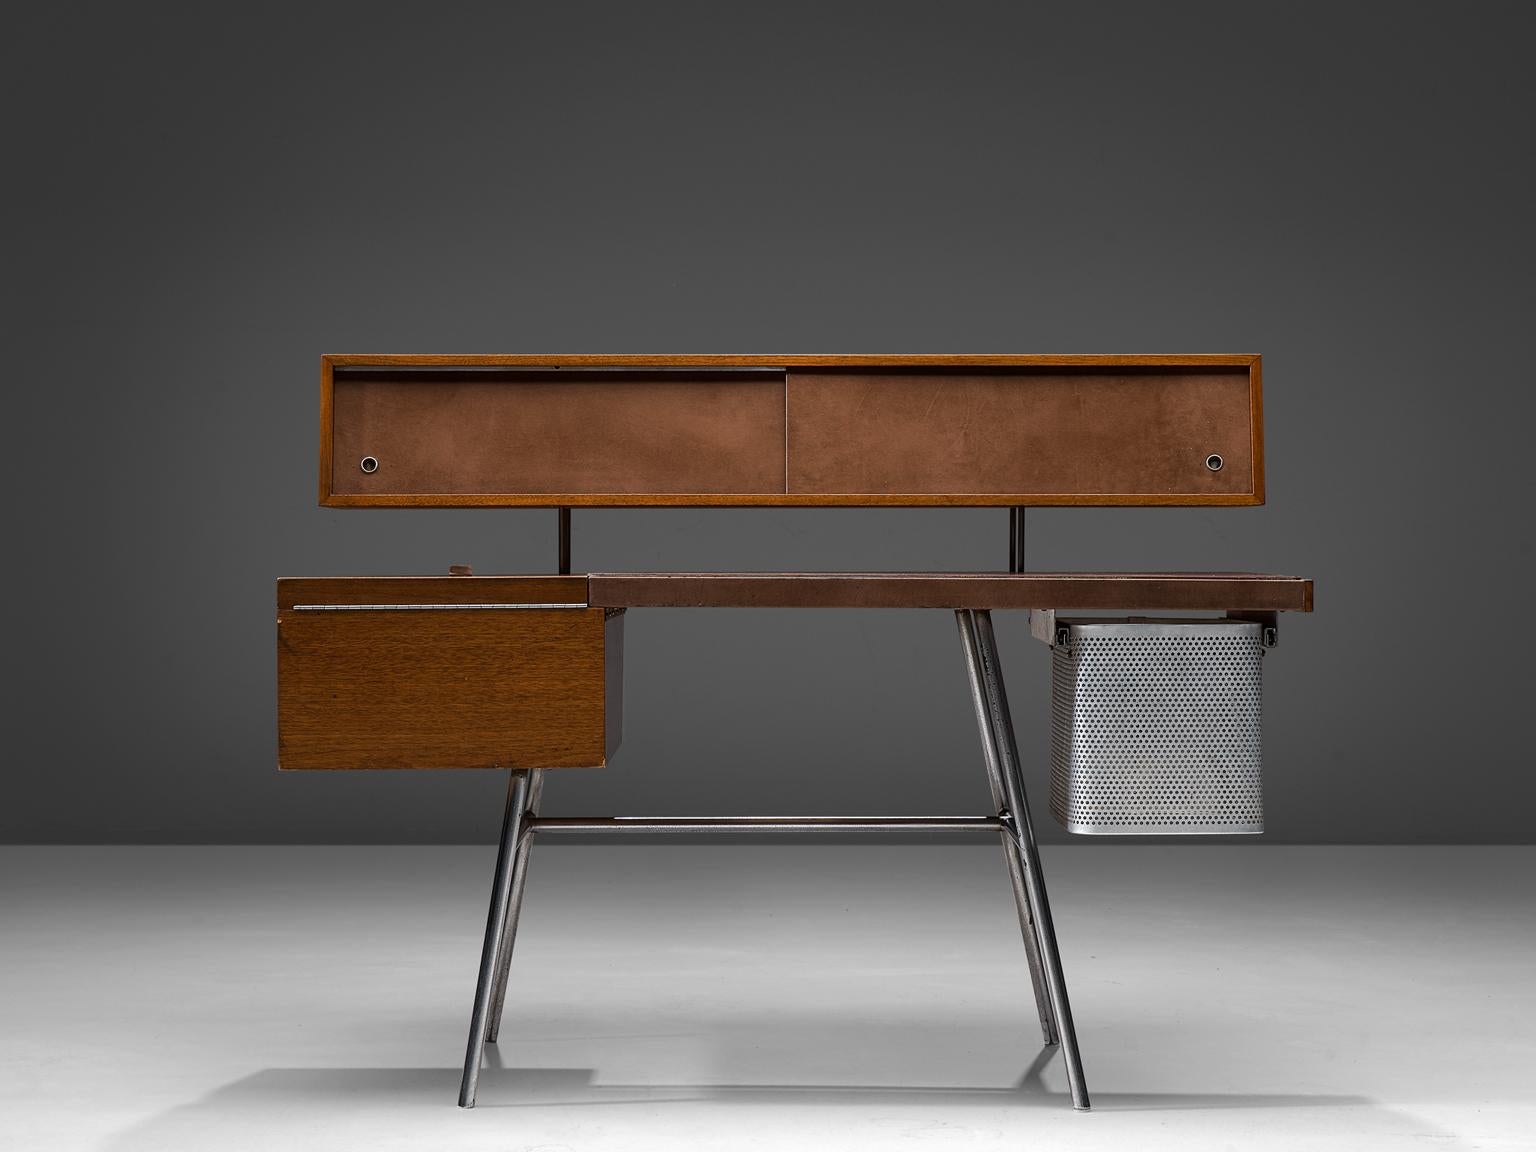 George Nelson for Herman Miller, desk n. 4658, walnut, steel and leather, United States, 1946.

From George Nelson's ground breaking 1948 group of designs for Herman Miller, this desk is a great example of post war modernism. Made of walnut with